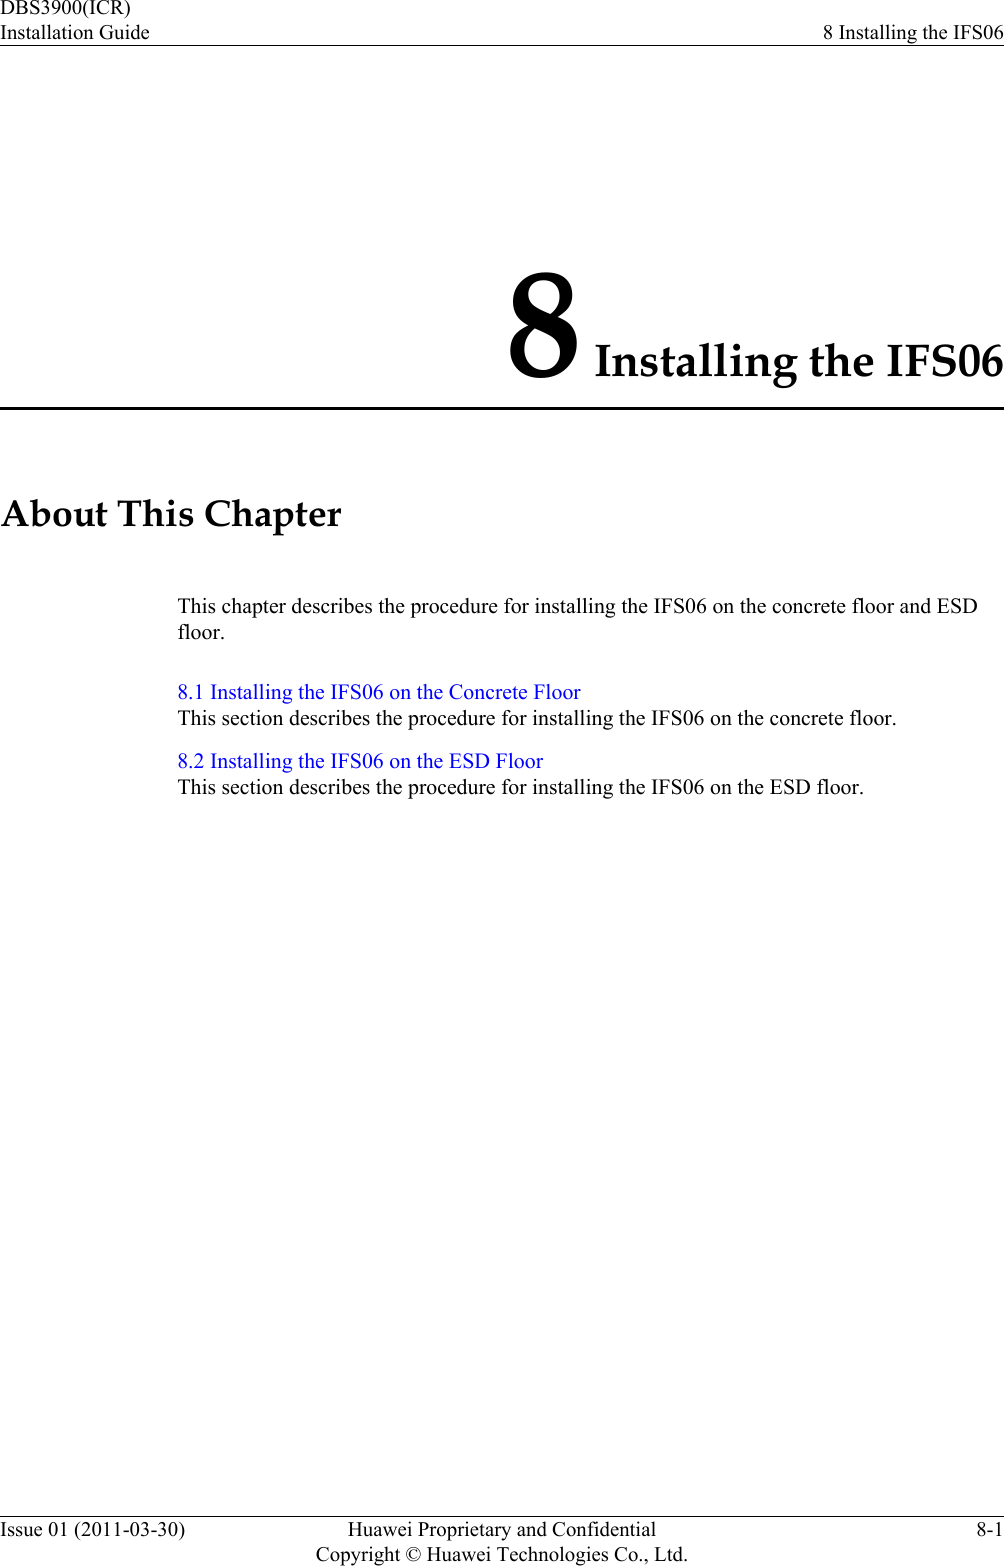 8 Installing the IFS06About This ChapterThis chapter describes the procedure for installing the IFS06 on the concrete floor and ESDfloor.8.1 Installing the IFS06 on the Concrete FloorThis section describes the procedure for installing the IFS06 on the concrete floor.8.2 Installing the IFS06 on the ESD FloorThis section describes the procedure for installing the IFS06 on the ESD floor.DBS3900(ICR)Installation Guide 8 Installing the IFS06Issue 01 (2011-03-30) Huawei Proprietary and ConfidentialCopyright © Huawei Technologies Co., Ltd.8-1